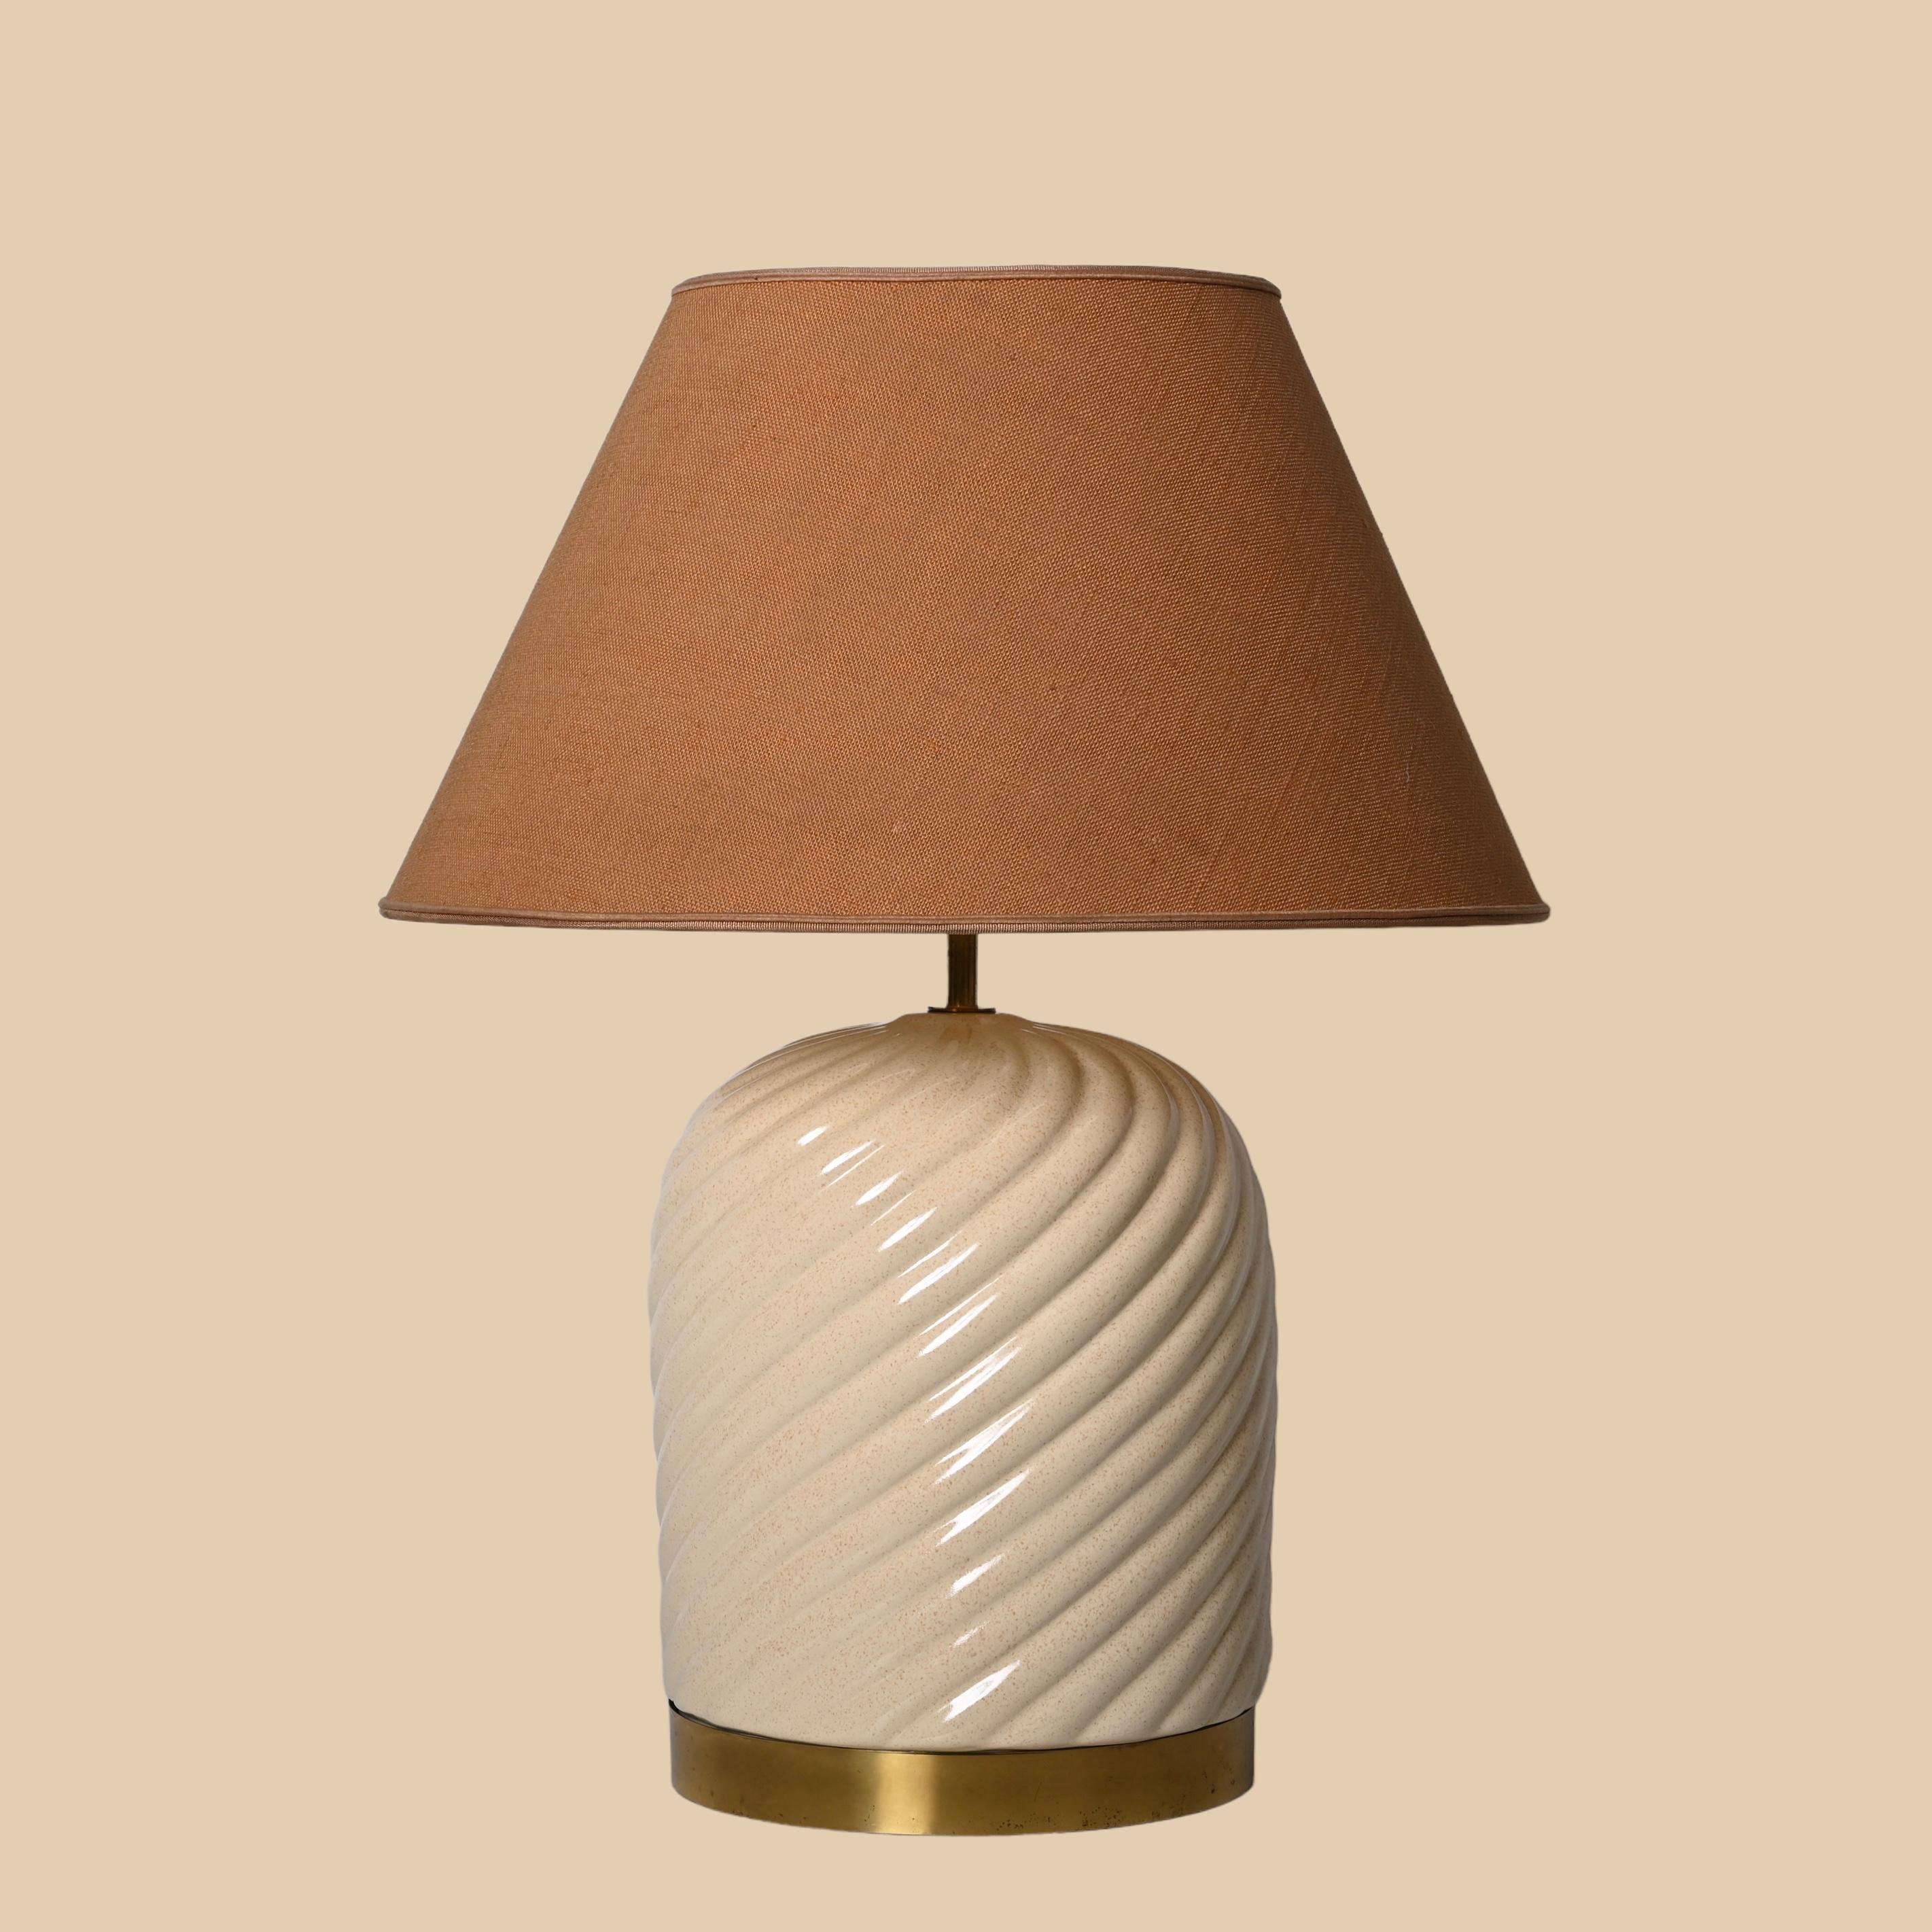 Amazing mid-century white ceramic table lamp. Tommaso Barbi designed this fantastic piece for a B. Ceramiche production during the late 1960s in Italy.

The manufacturer's branding is shown on the inside of the lamp, while the vivid white cream of